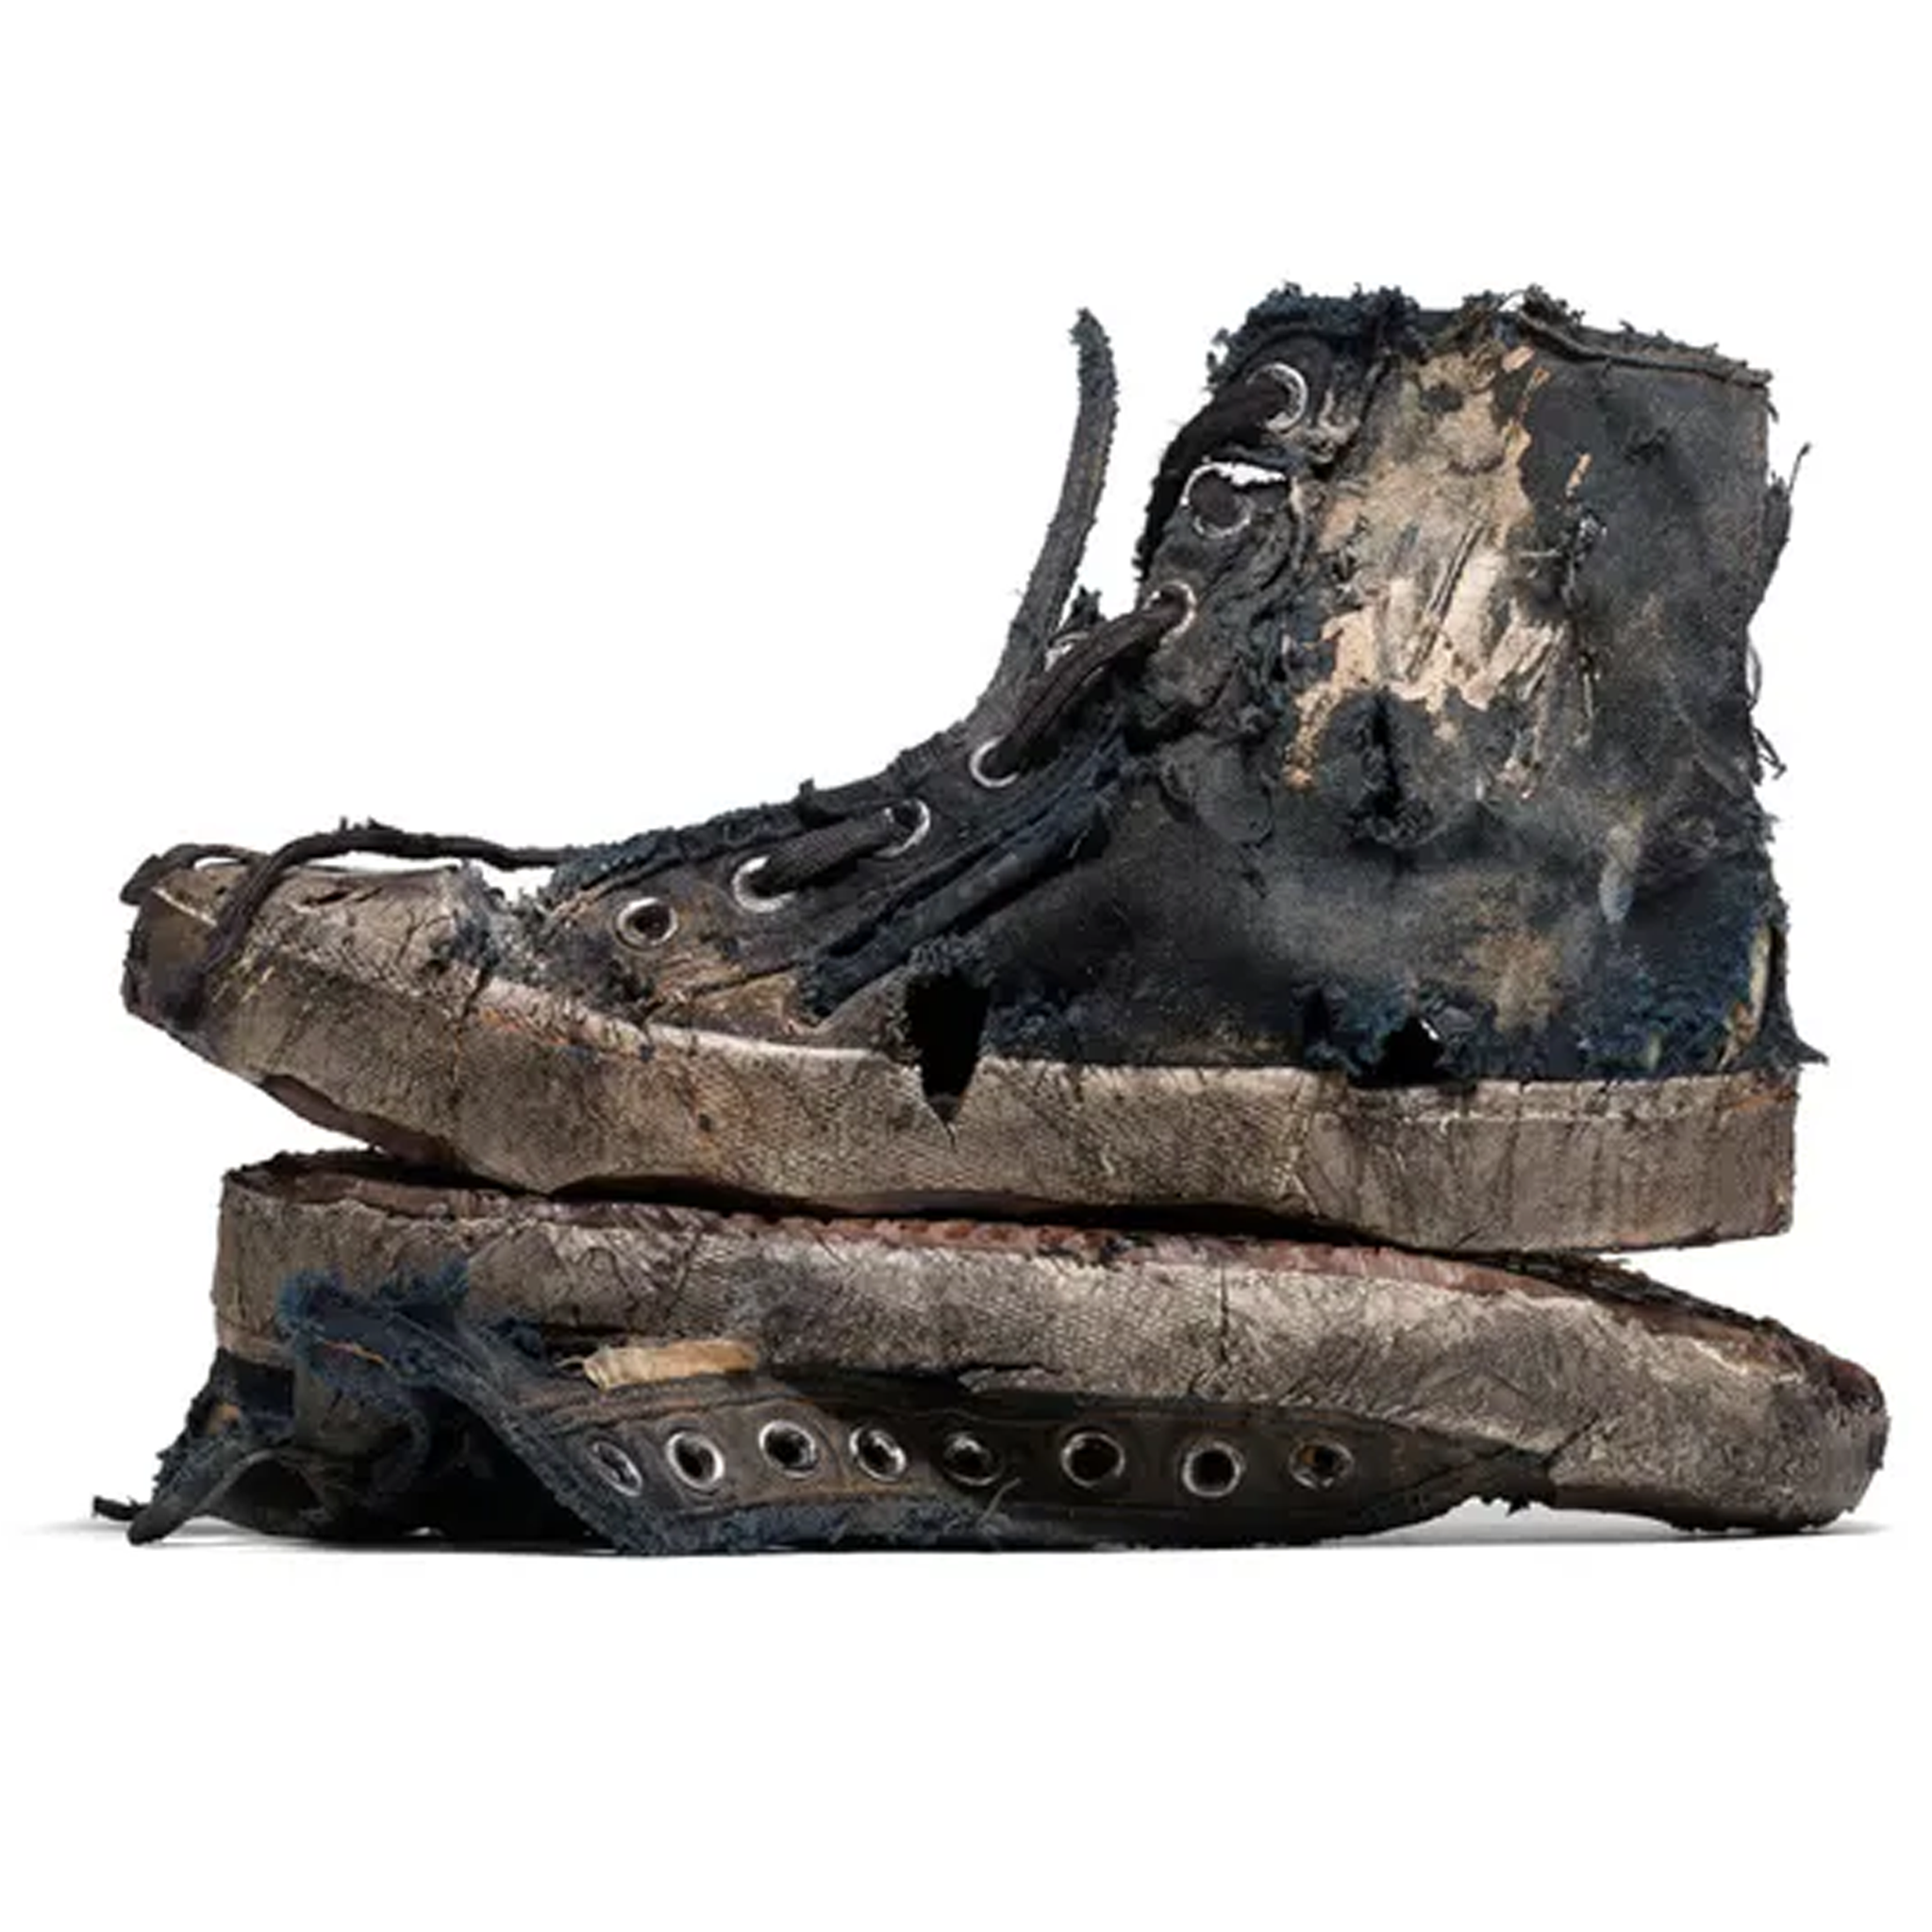 Balenciaga criticised for selling filthy garbage sneakers for S2590   MothershipSG  News from Singapore Asia and around the world